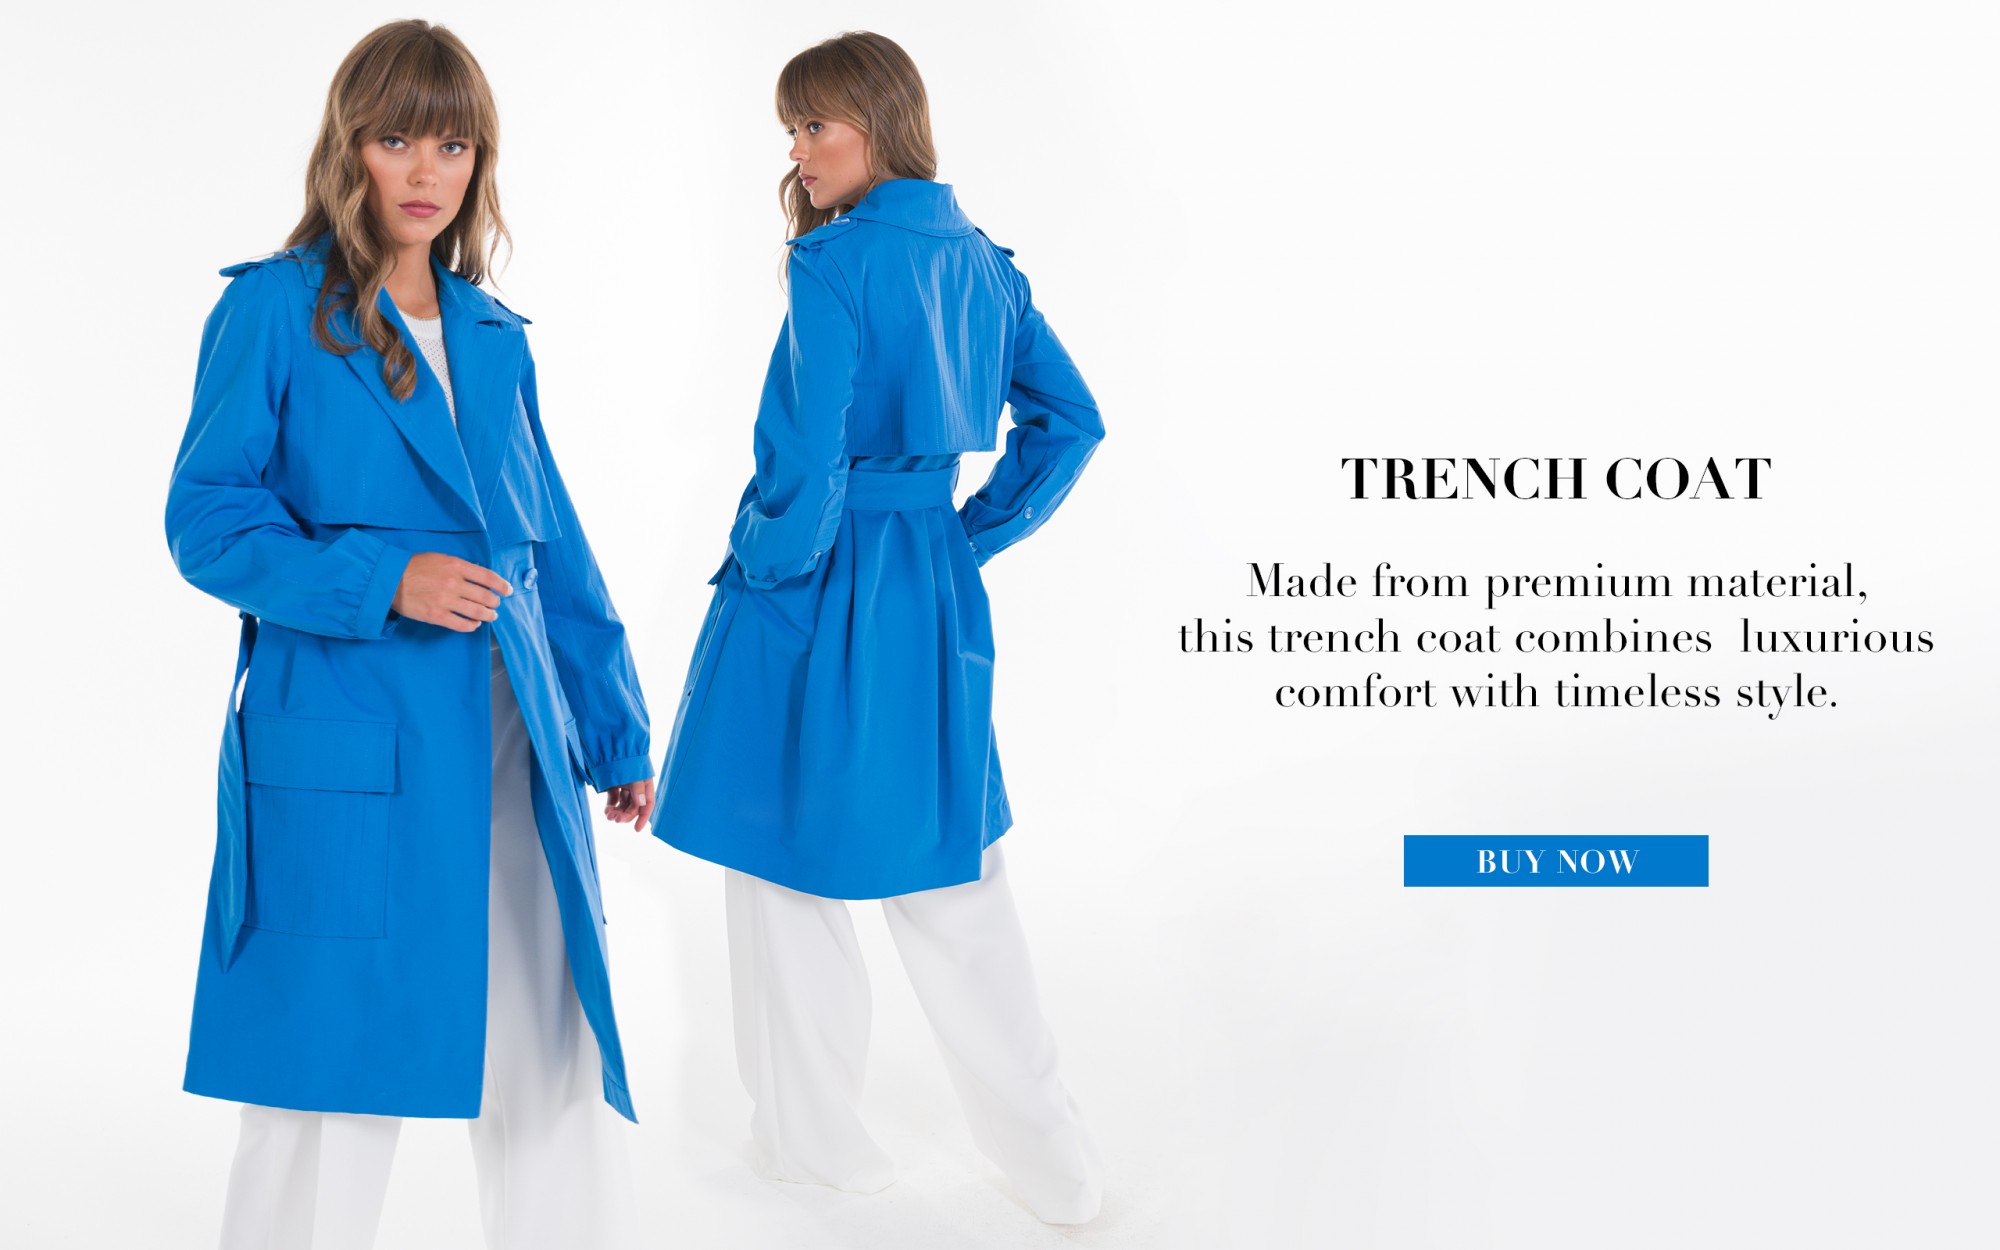 Front double-breasted rench coat with buttons, side pockets, front pockets with flaps, buttoned cuffs, belt to adjust and overlap at the top. Portuguese Design